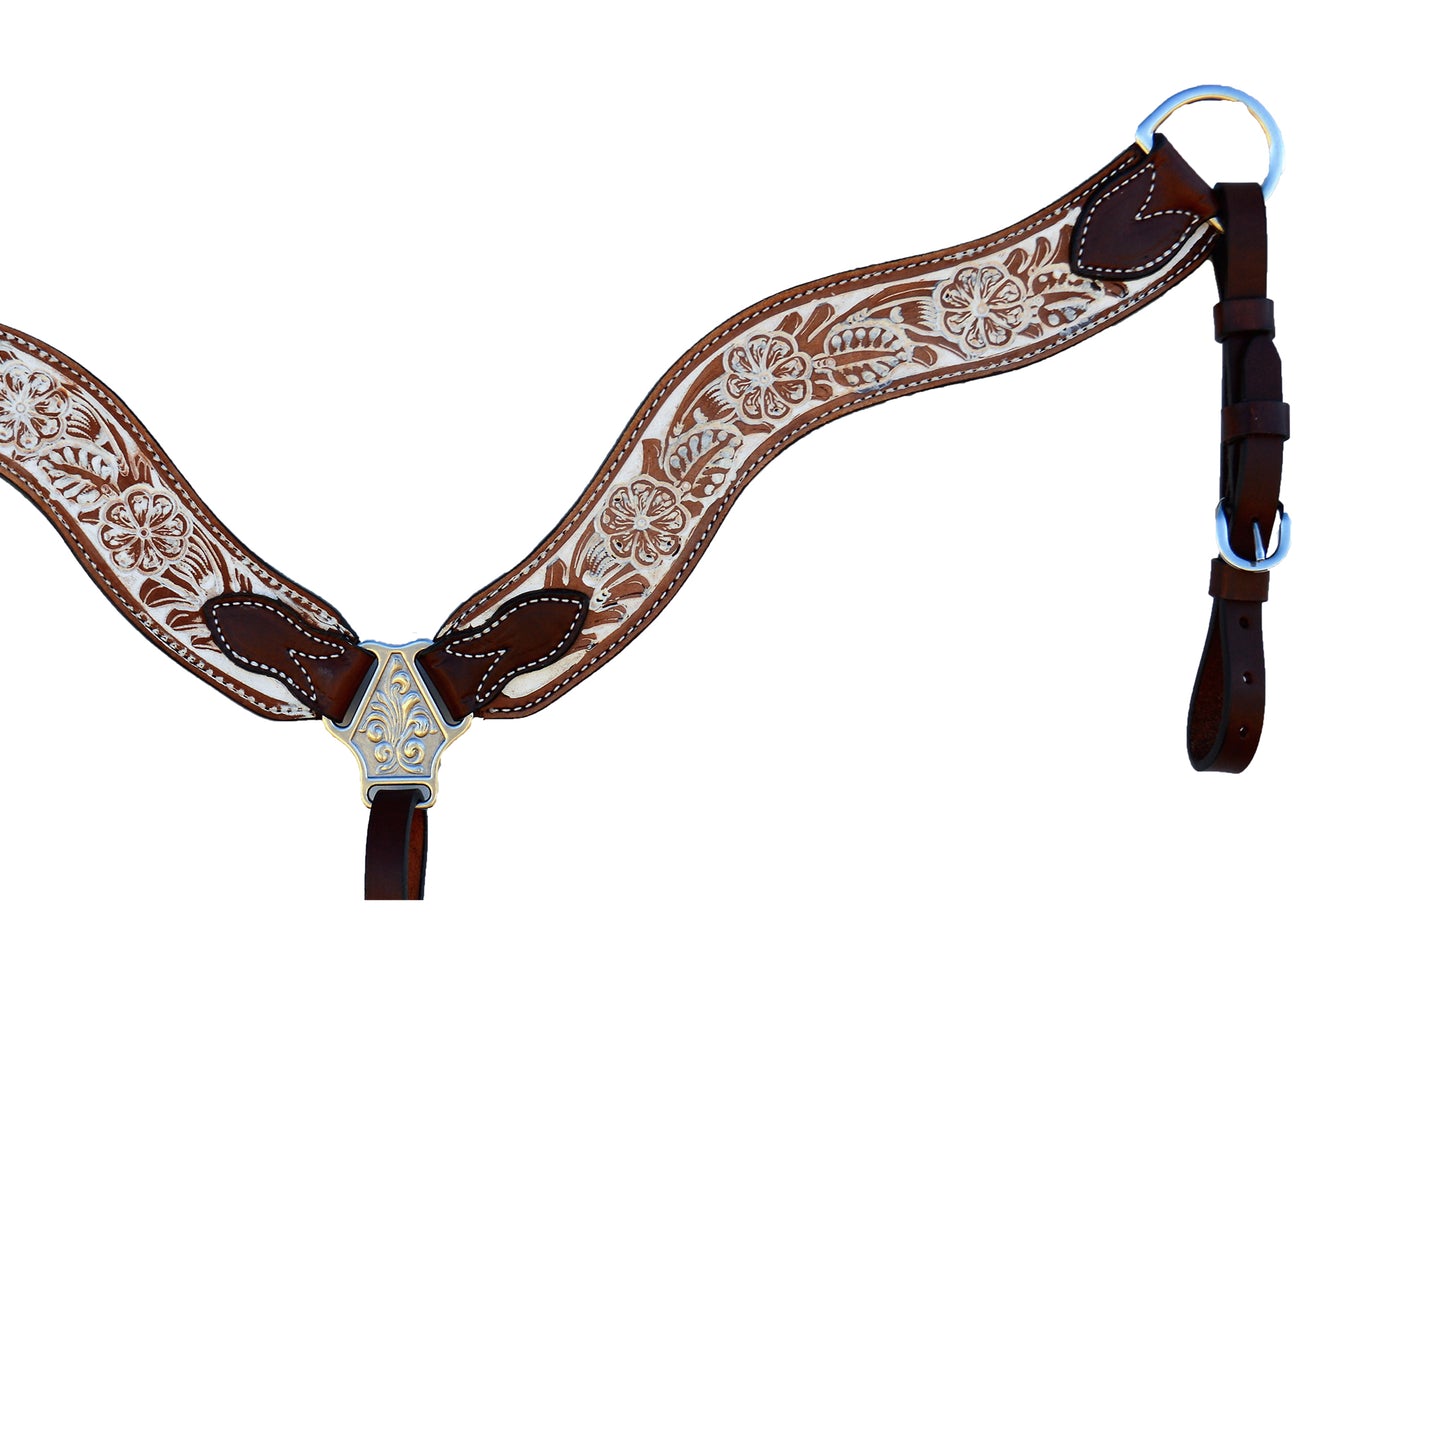 2-1/2" Wave breast collar rough out chocolate leather floral tooled with ivory rustic background paint.